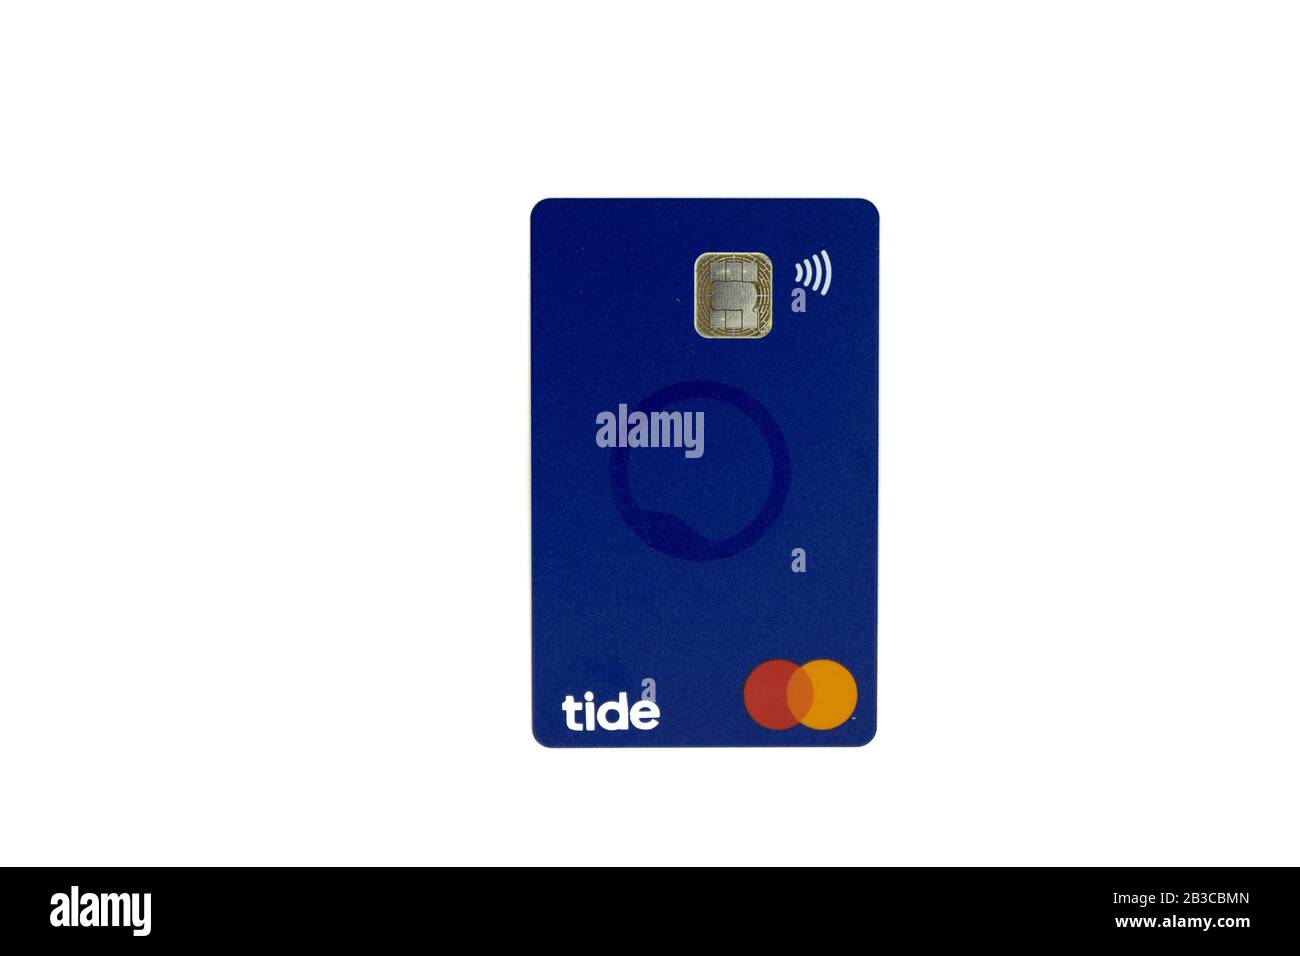 A Tide bank Debit card Mastercard isolated on a white background Stock Photo